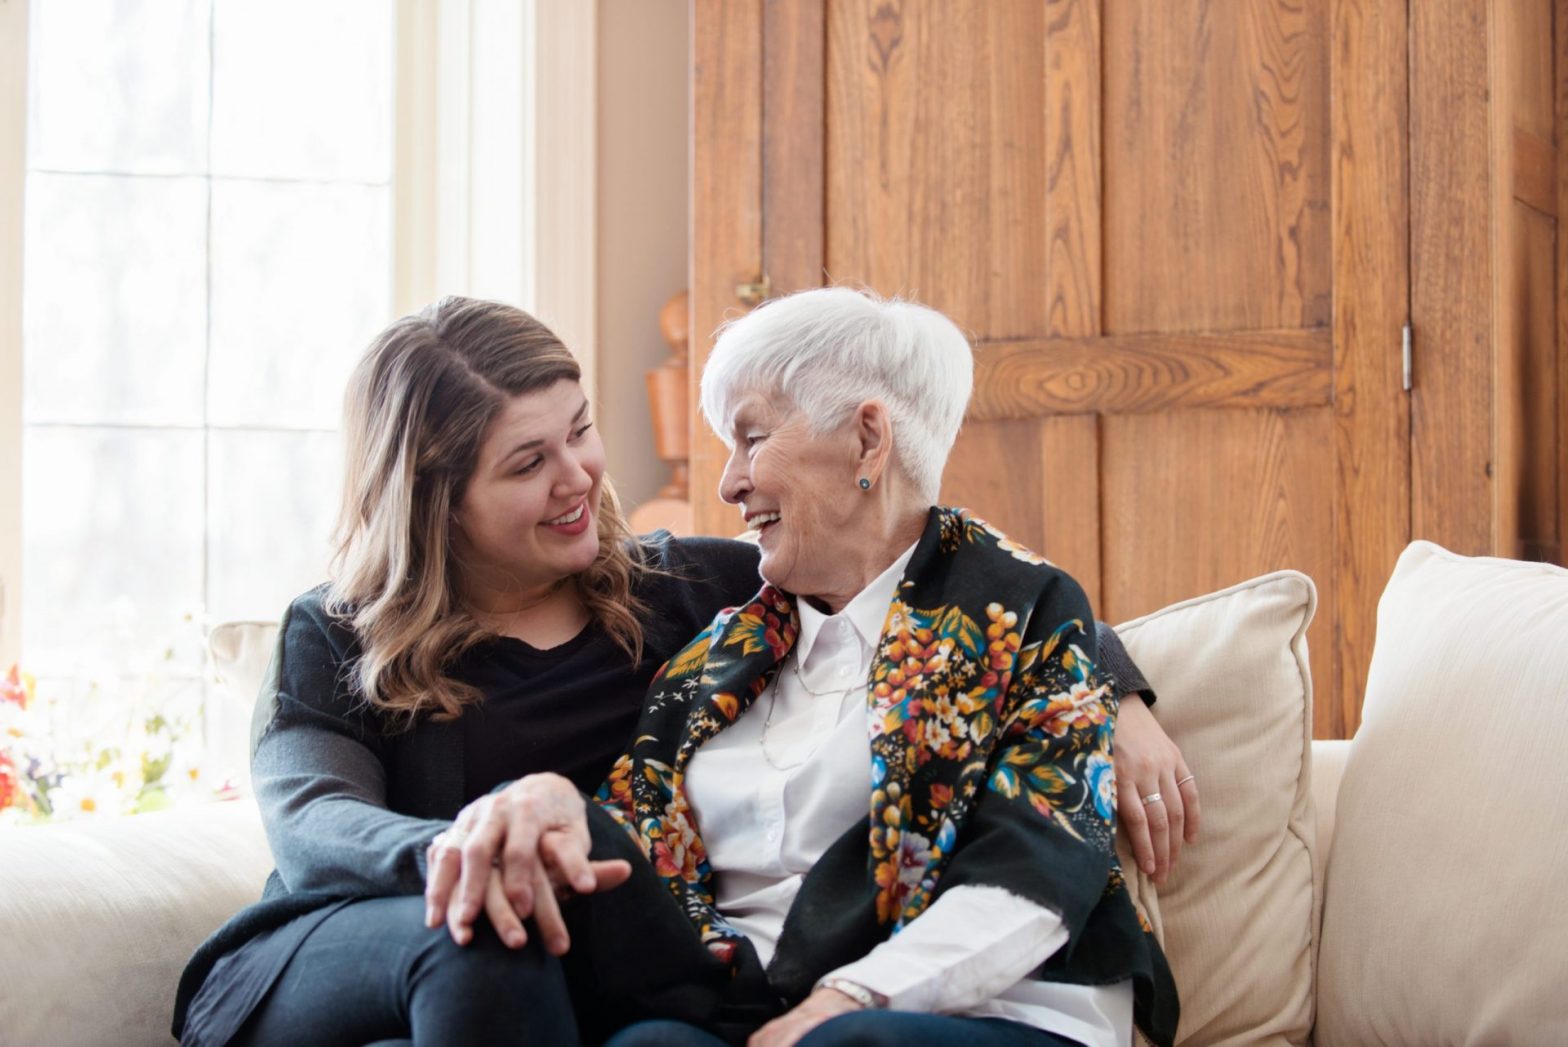 Young woman and elderly woman smiling and embracing each other while sitting on a couch